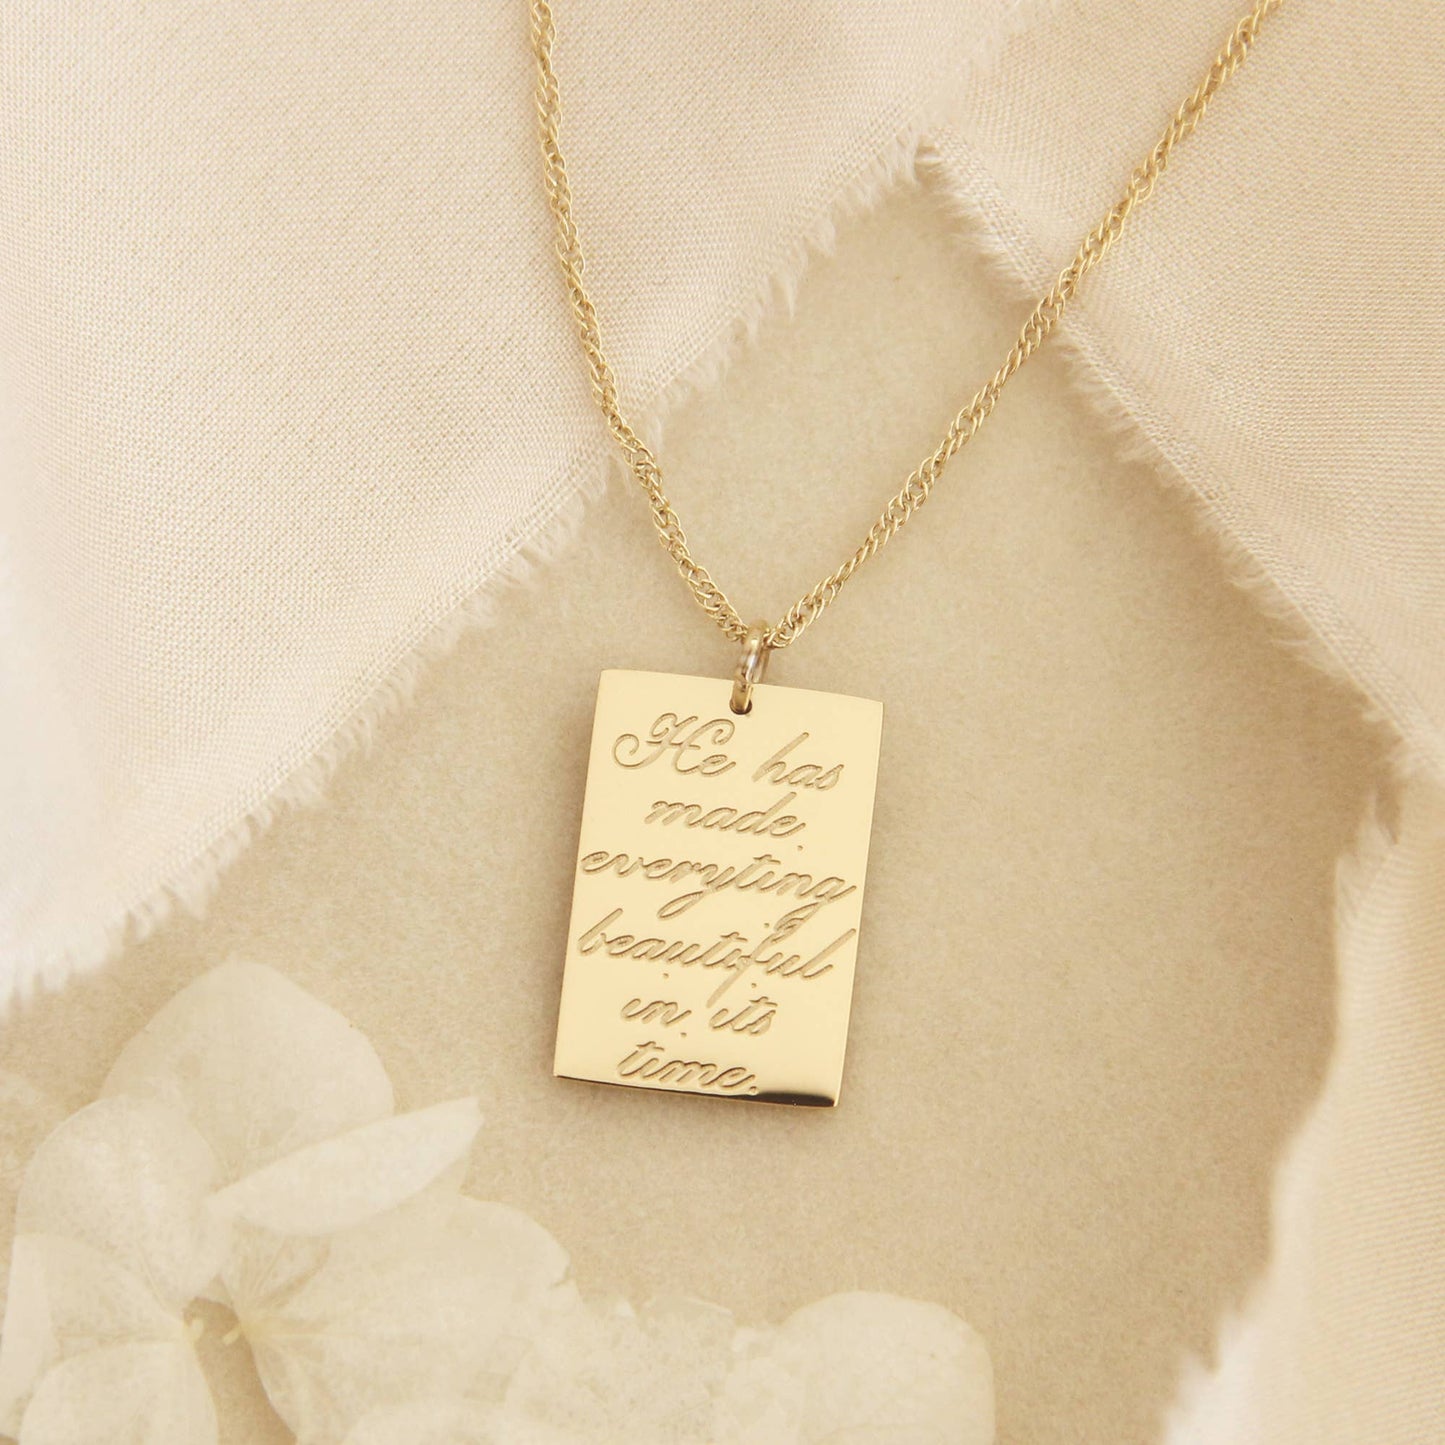 Ecclesiastes 3:11 Necklace, He Has Made Everything Beautiful